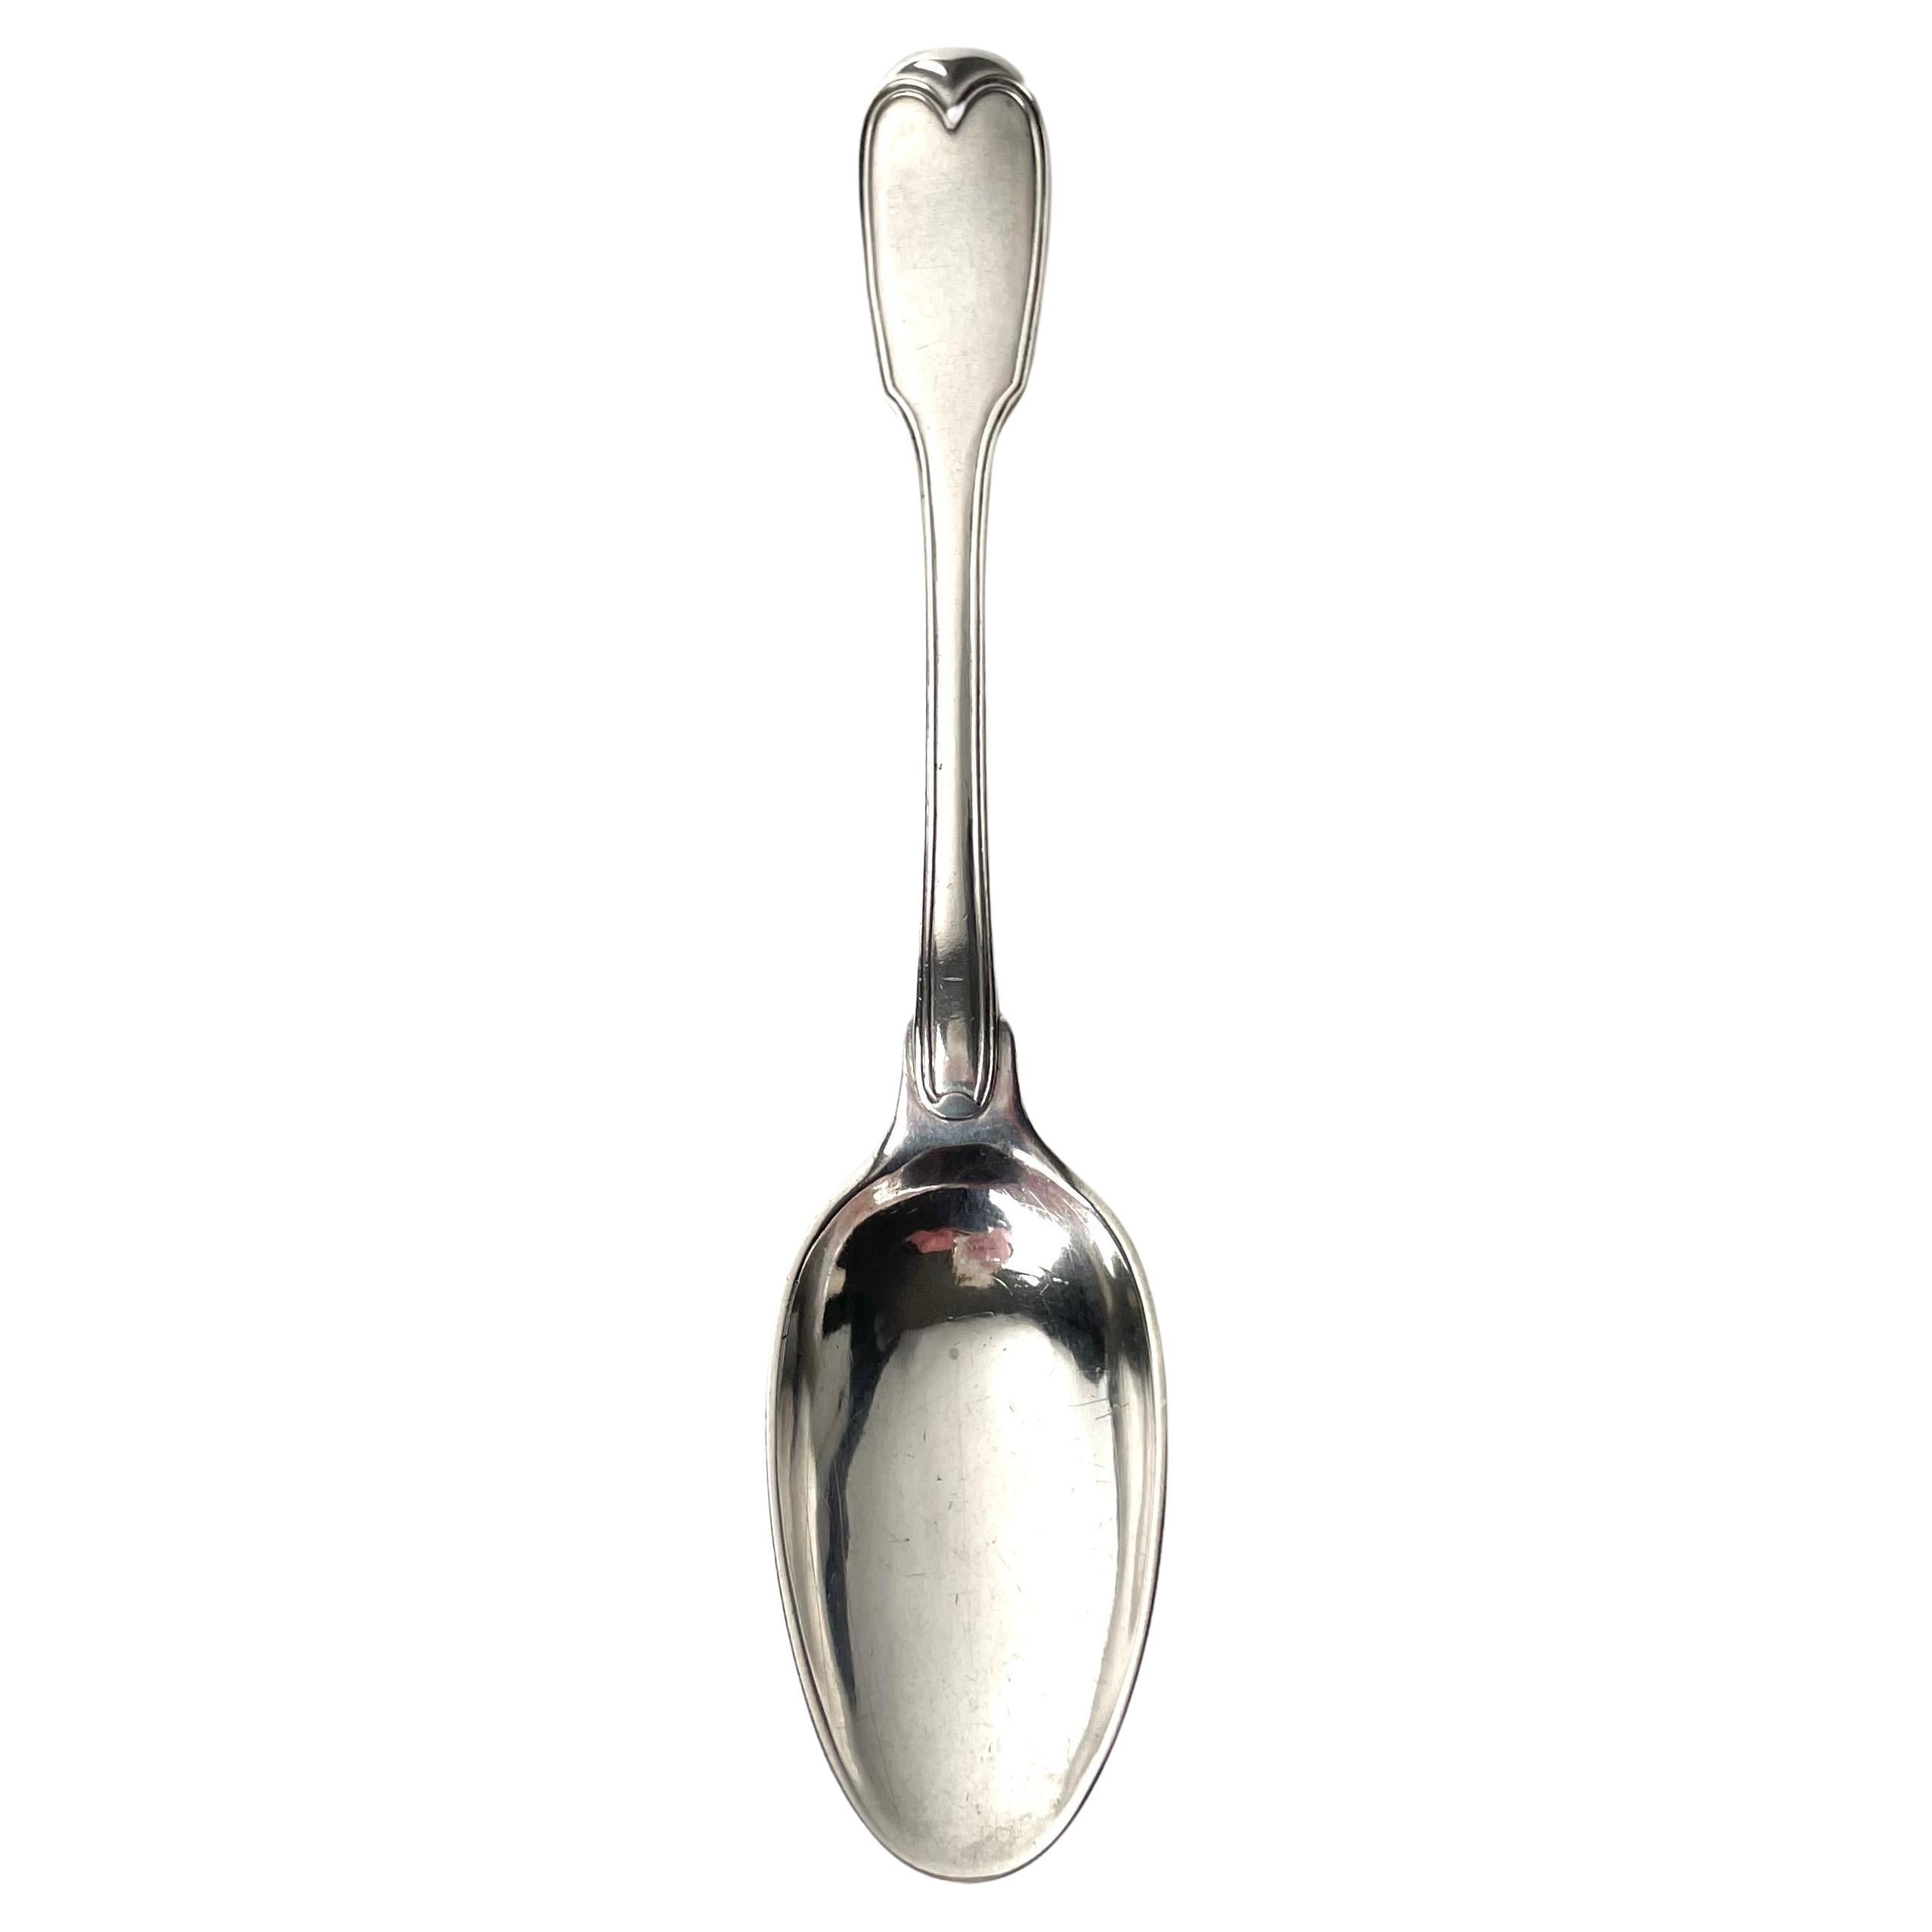 Gustavian silver spoon by Arvid Floberg dated 1785 with baronial coat of arms For Sale